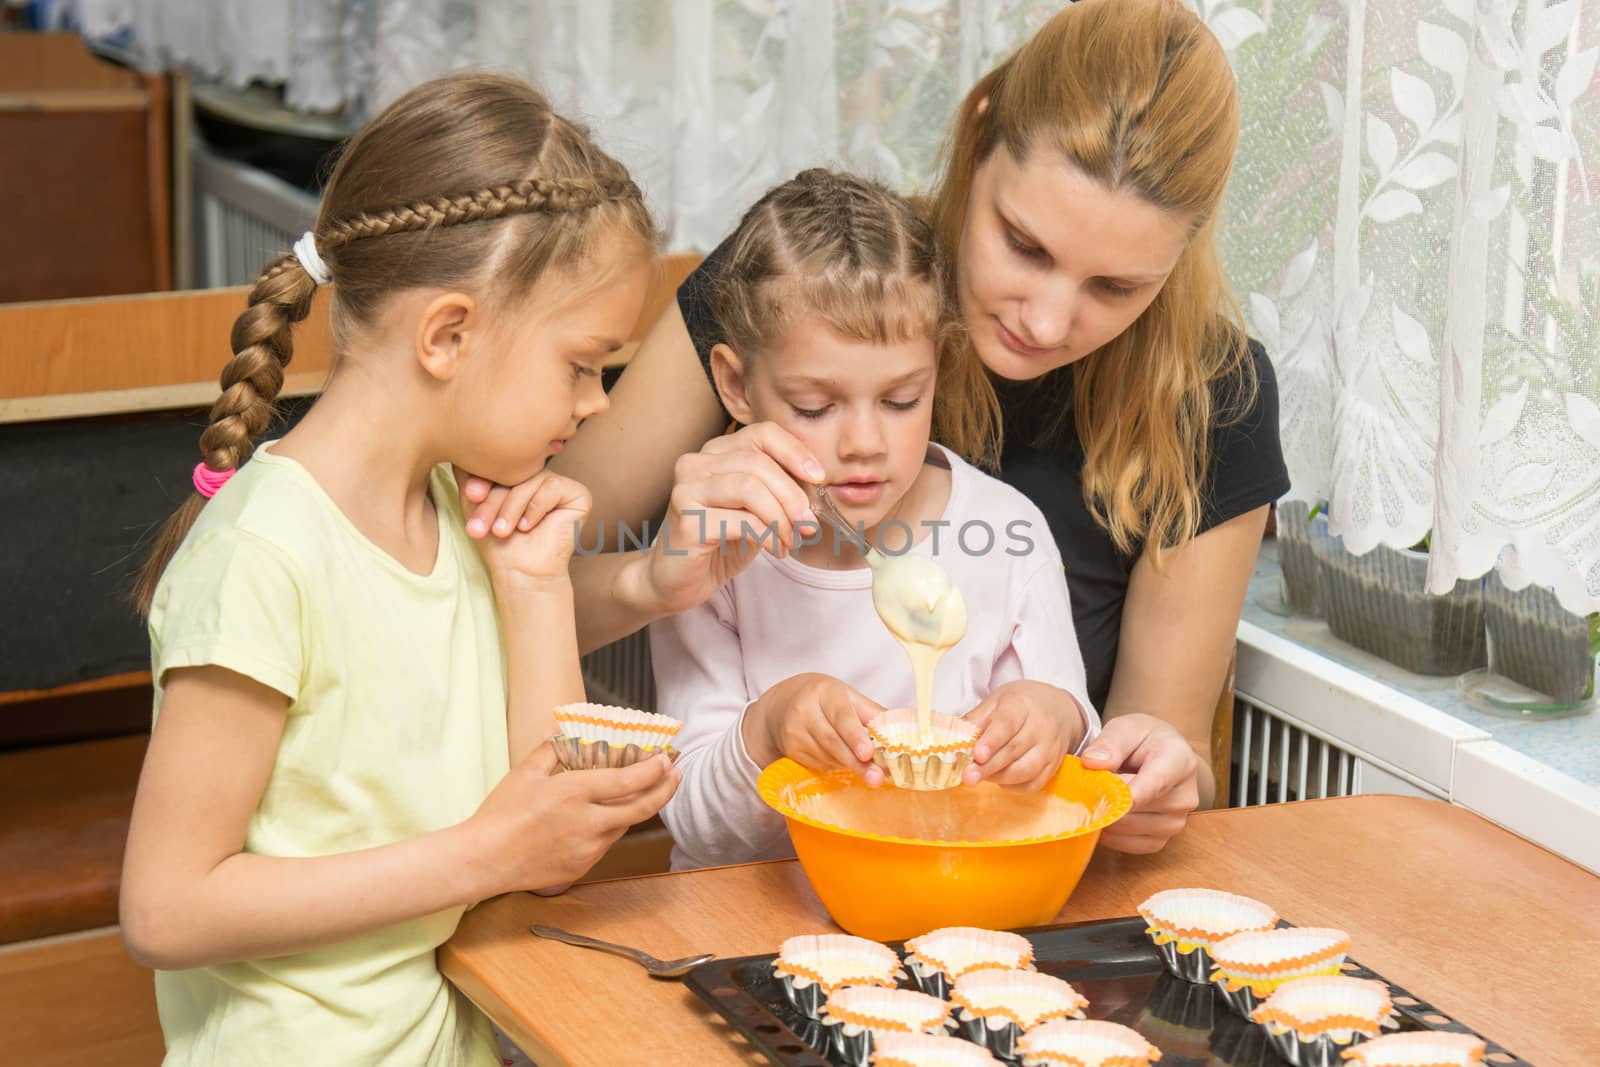 Mom teaches two daughters to cook Easter cupcakes by Madhourse